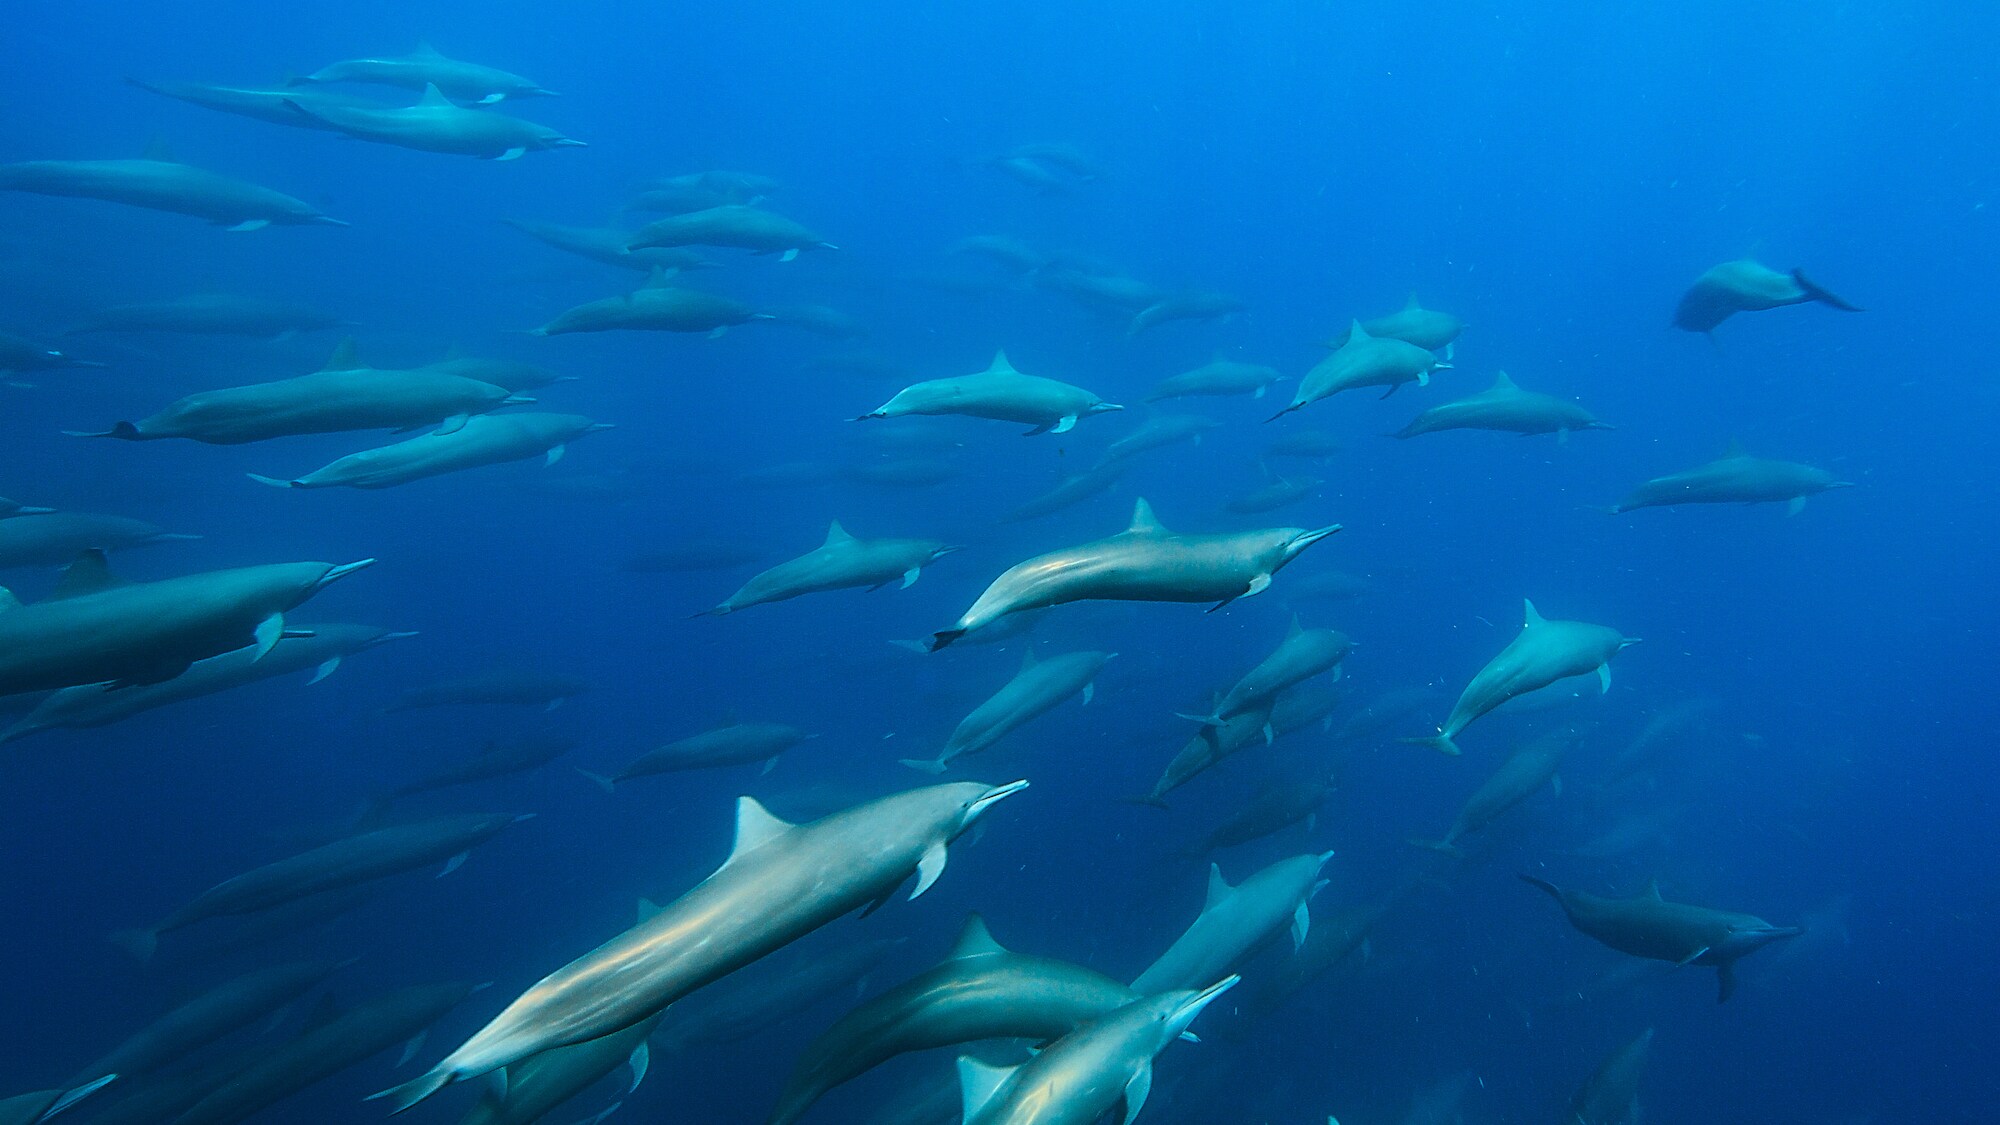 A large pod of Spinner dolphins. (Credit: National Geographic/Bertie Gregory for Disney+)